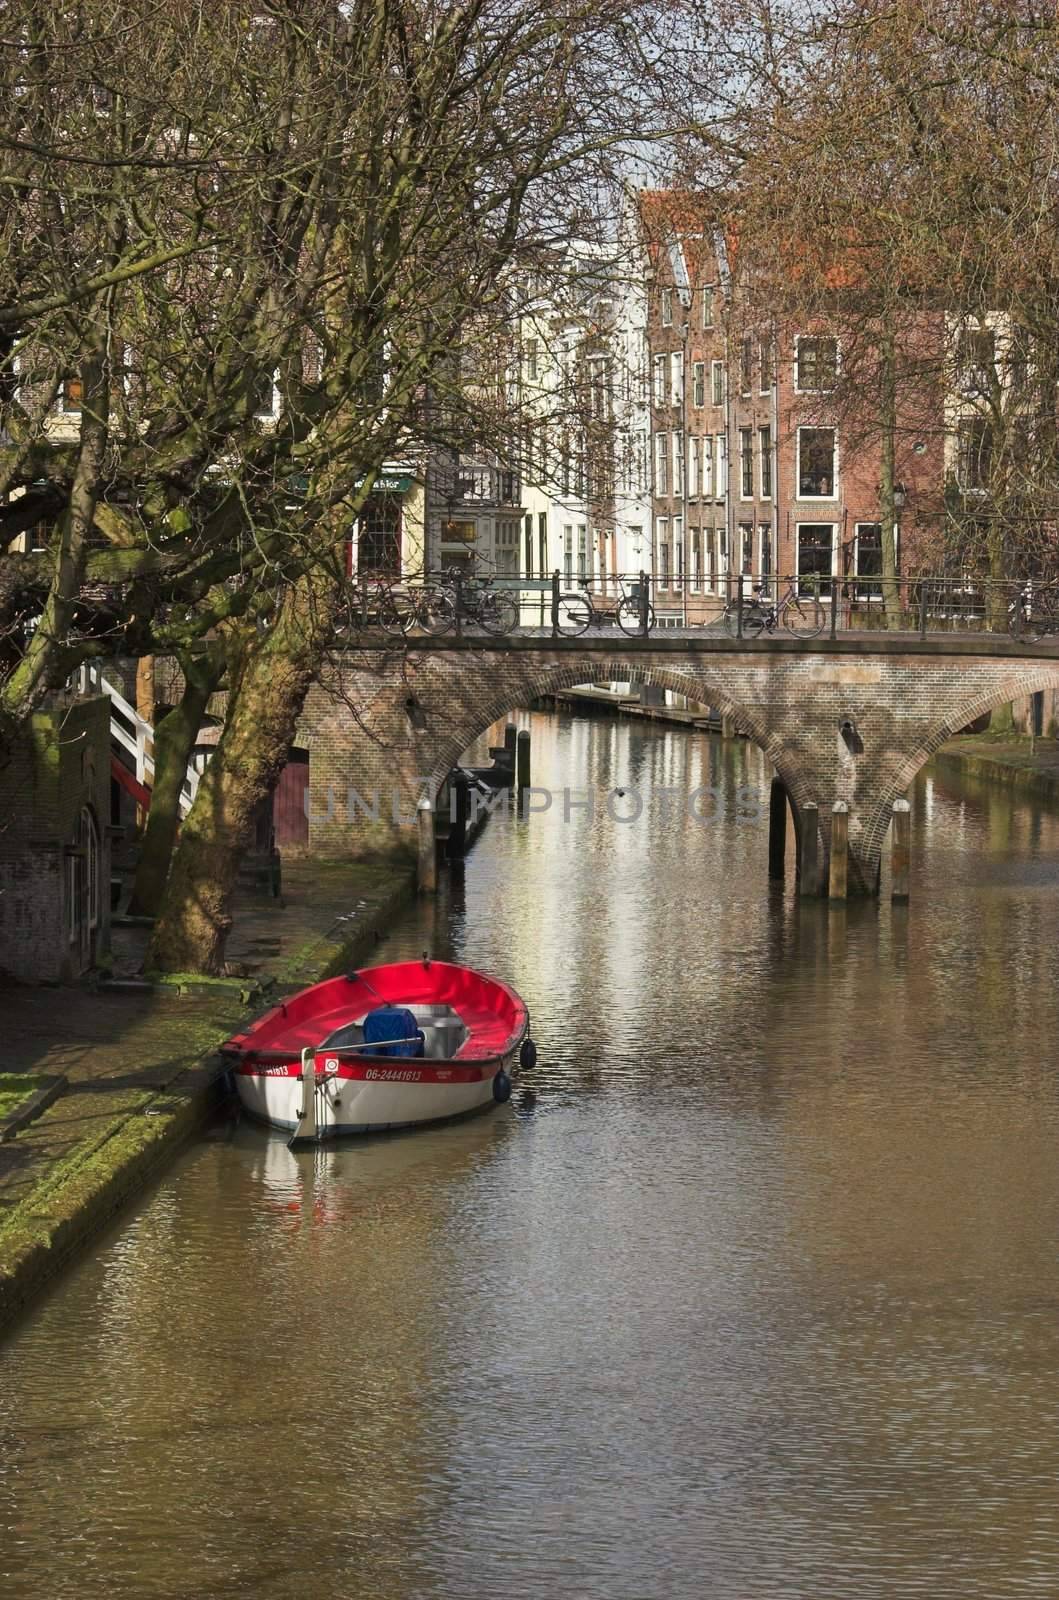 Rowing boat on a picturesque canal in Utrecht, Holland